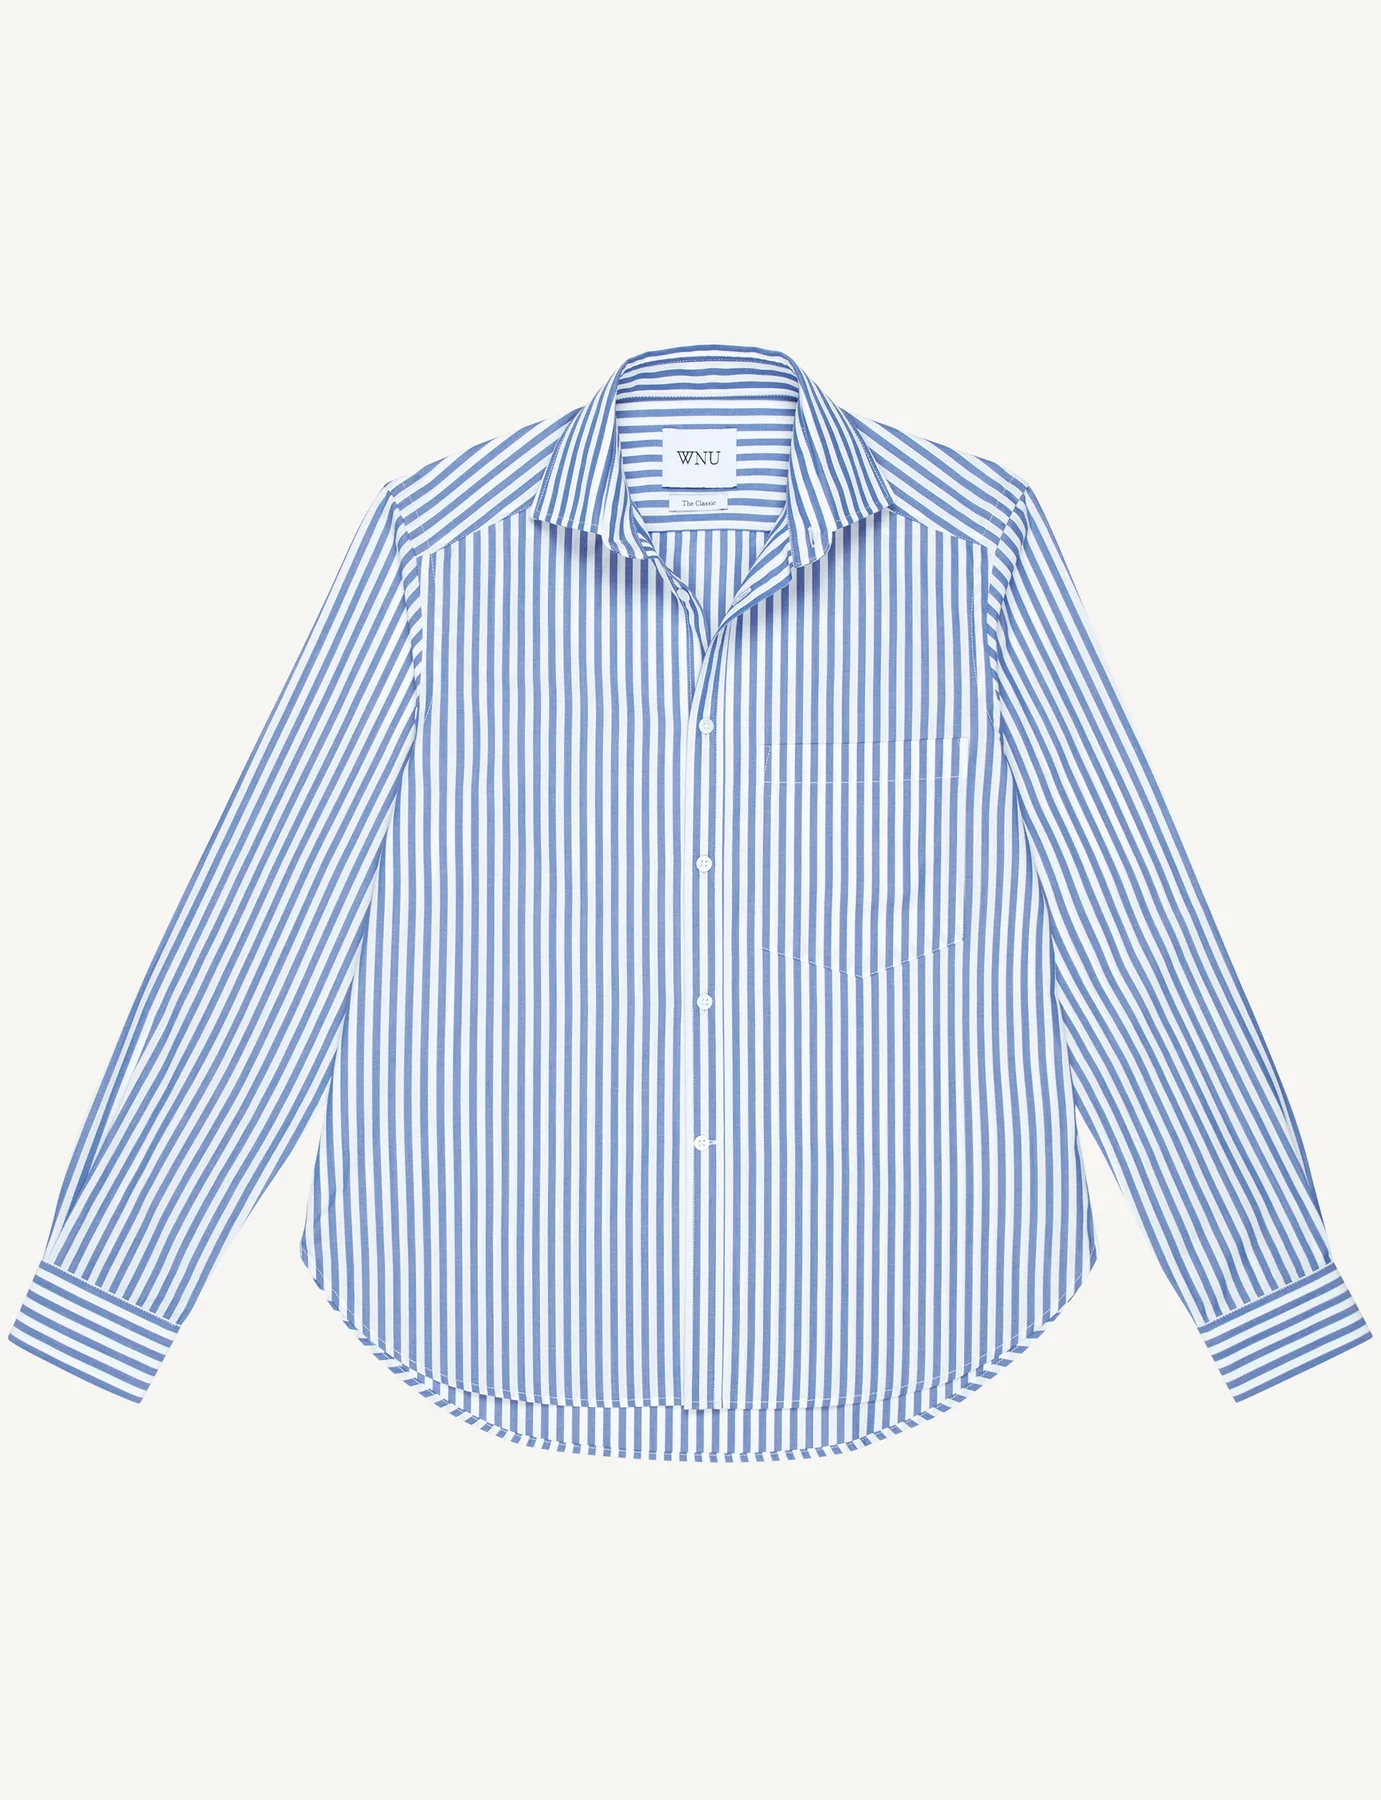 With Nothing Underneath, The Classic: Poplin, Royal Blue Stripe